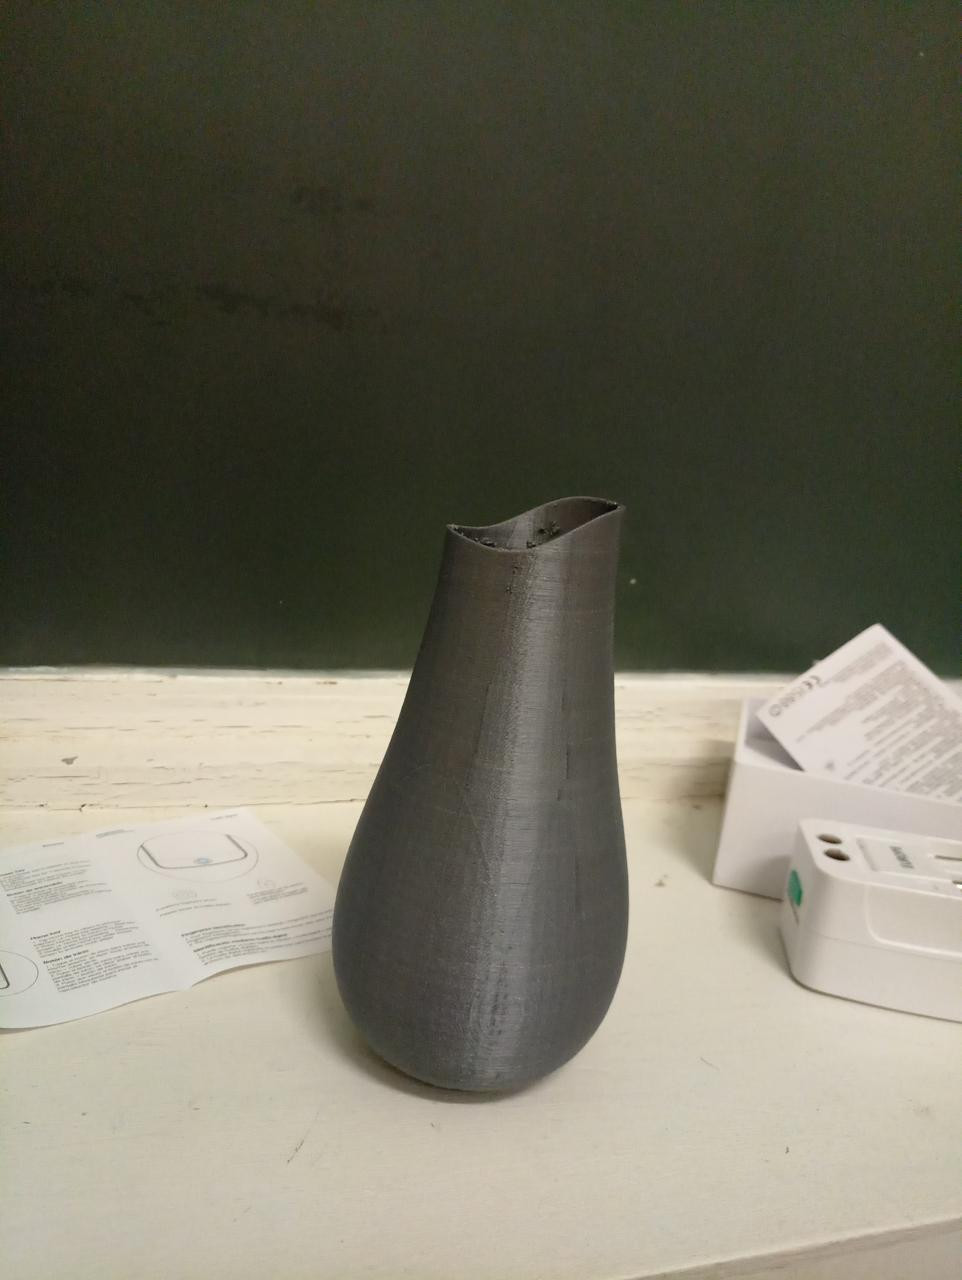 13 Amazing Onyx Vases for Sale 2024 free download onyx vases for sale of 3d printing services near you in sydney new south wales australia within chop chop 3d print 3d printing photo